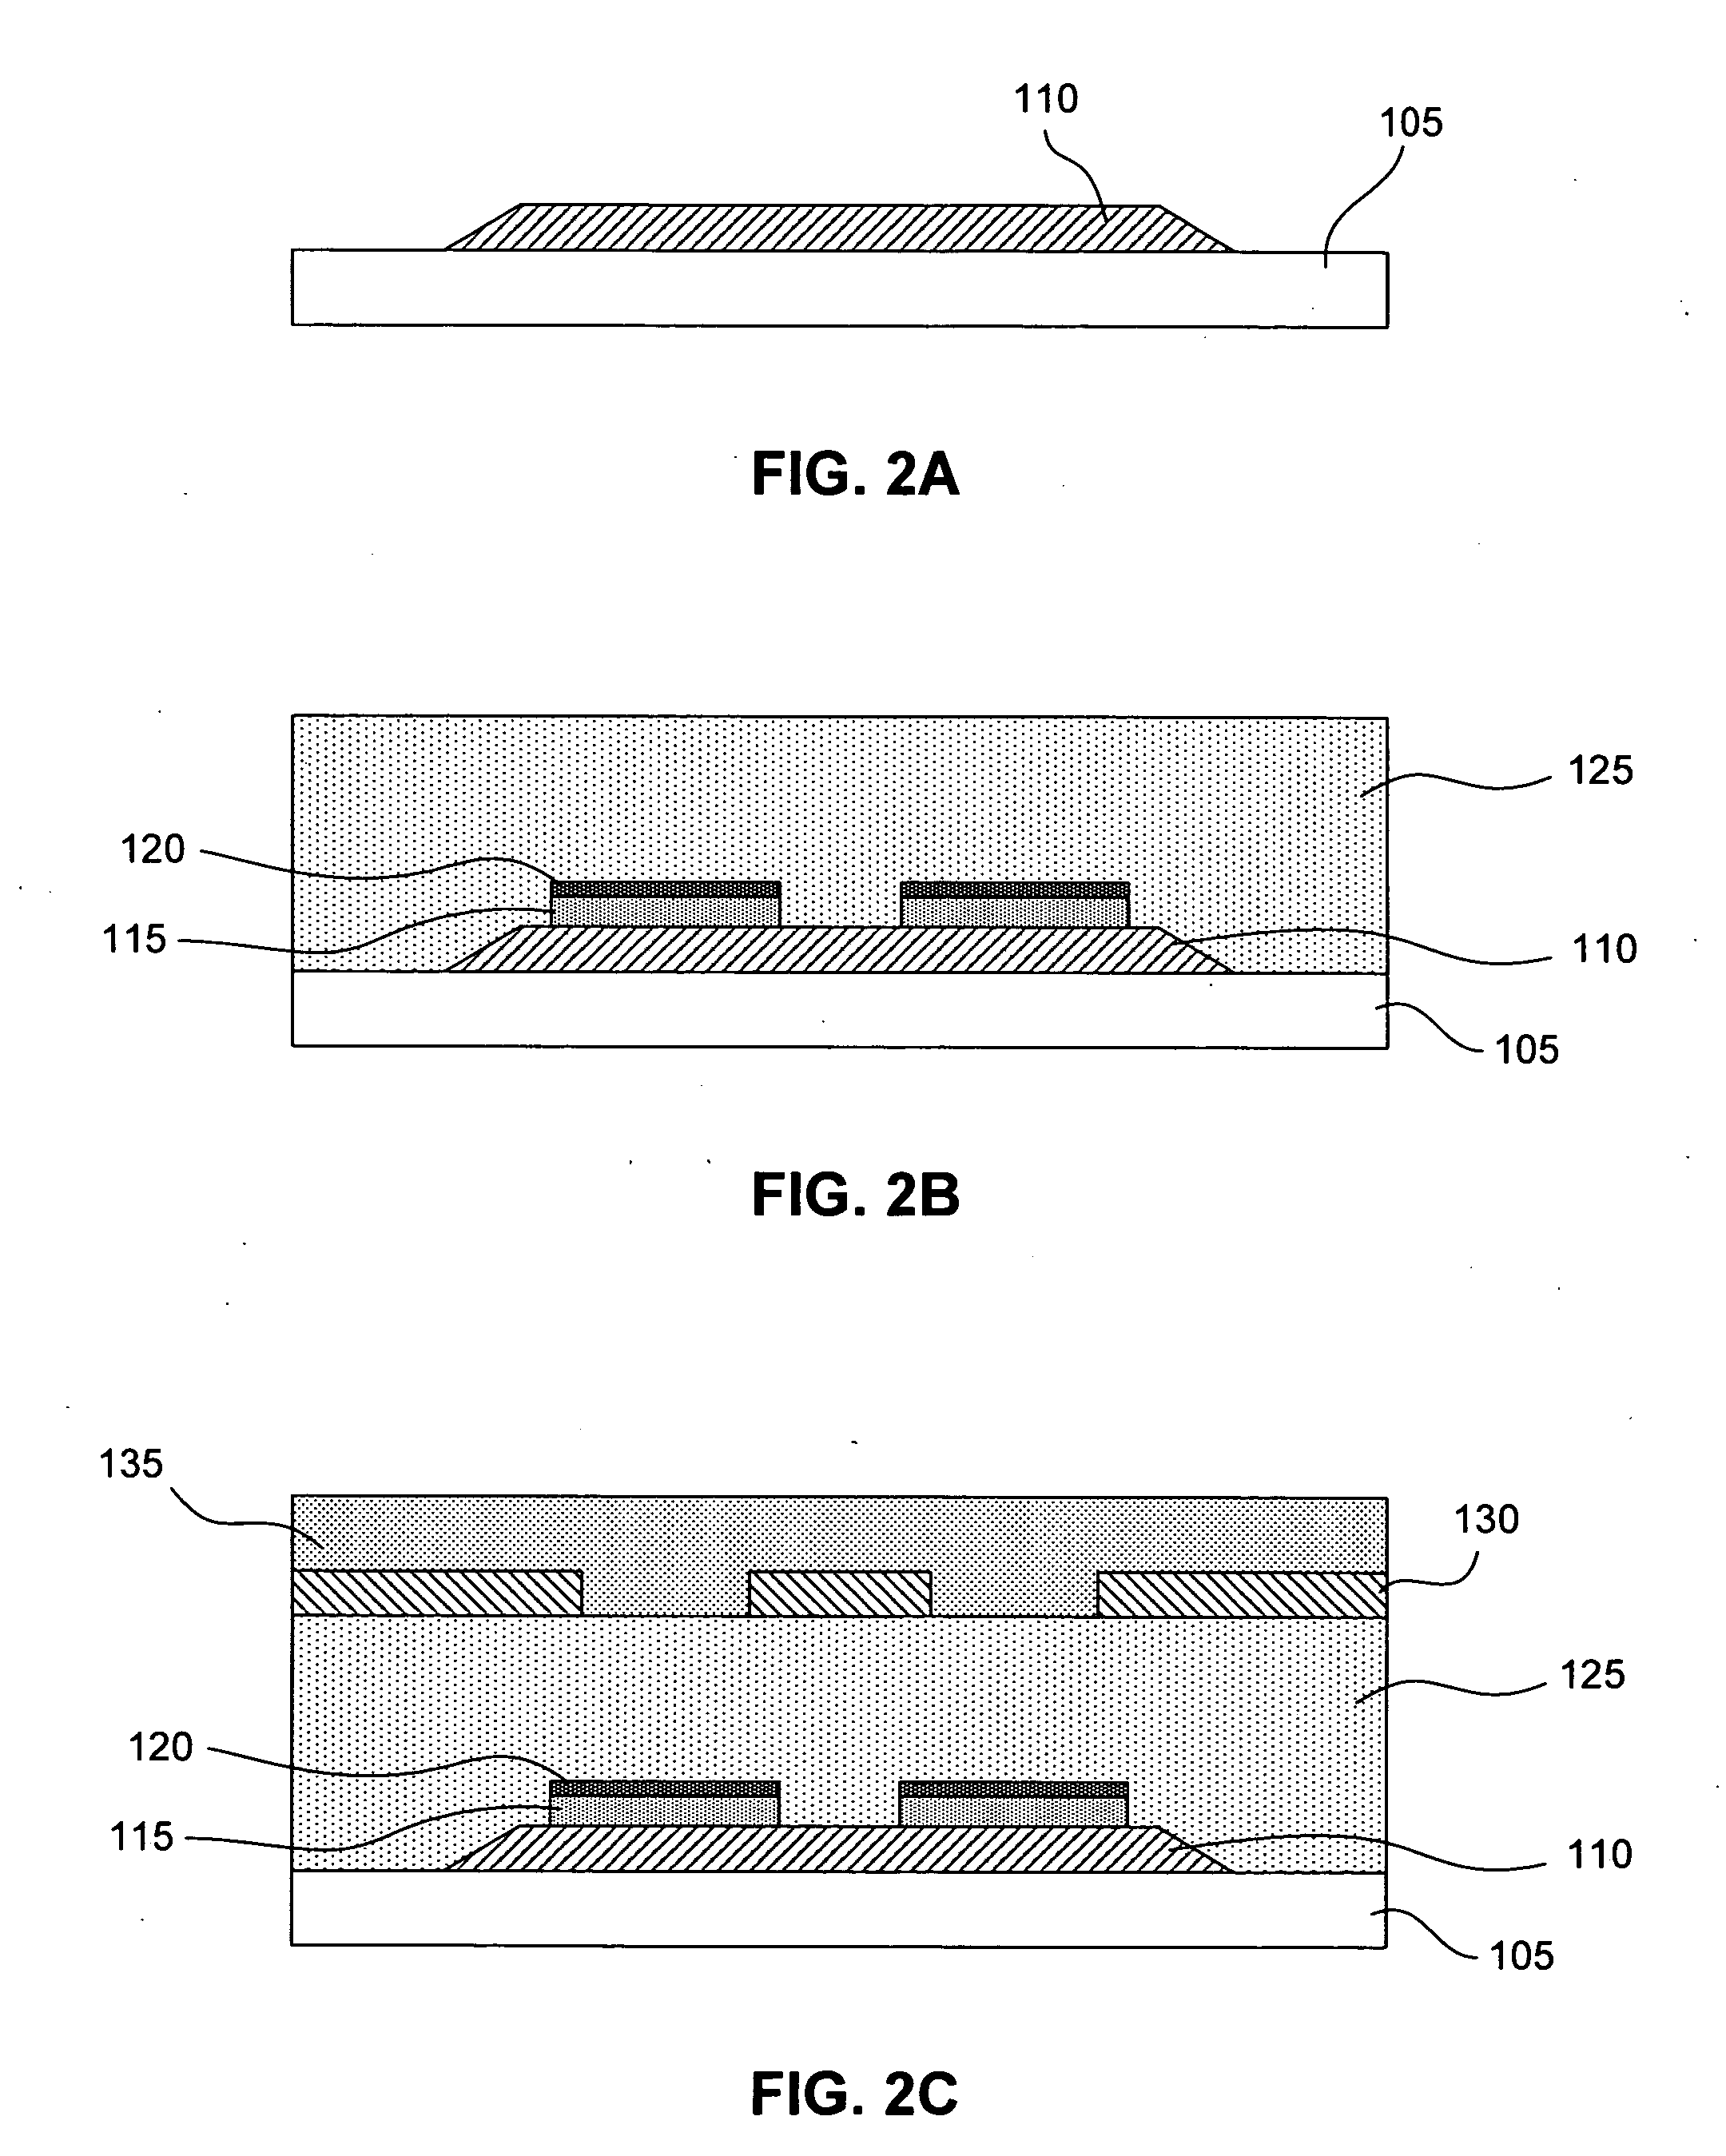 Emitter structure with a protected gate electrode for an electron-emitting device